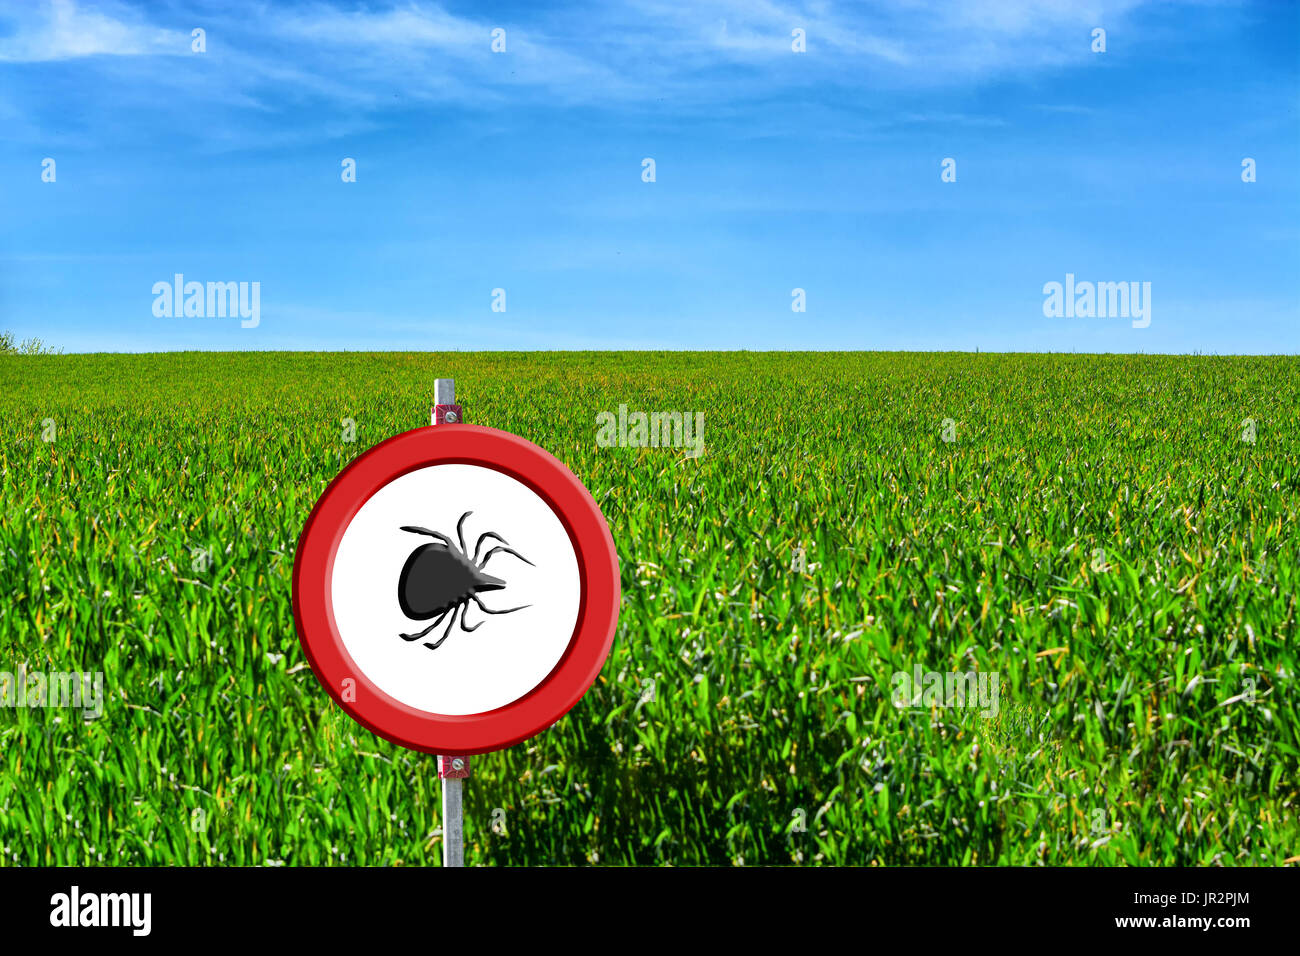 Borreliose and tick warning, round red warning sign with tick symbol in front of a green meadow. Stock Photo